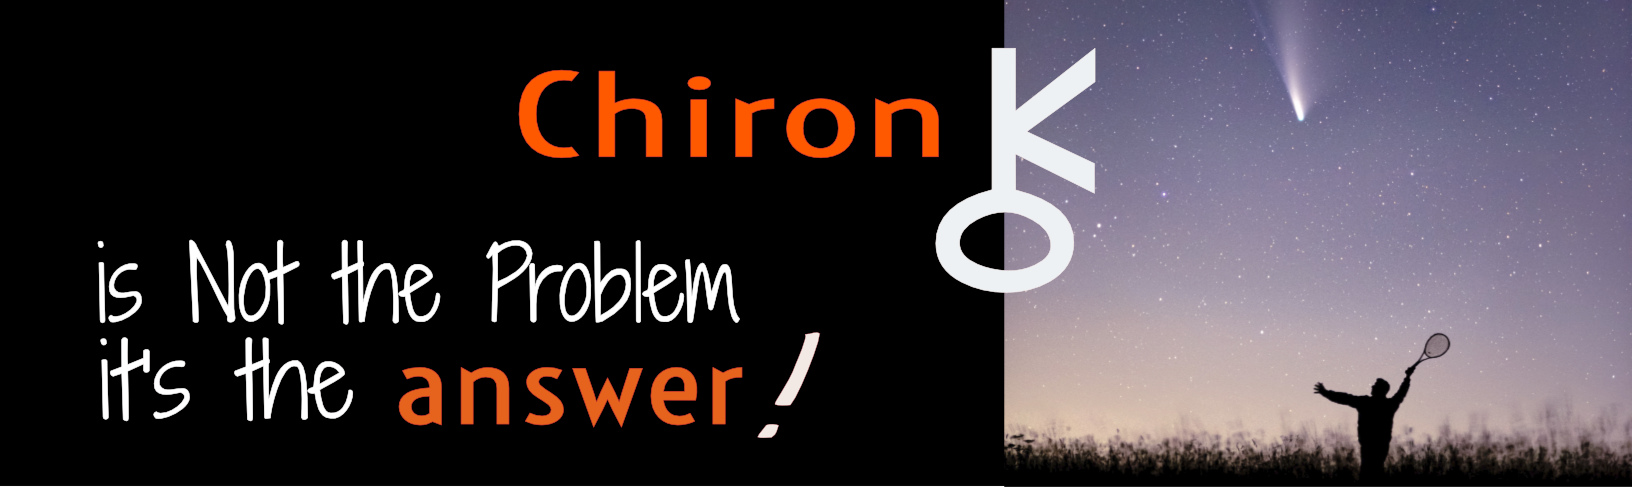 Chiron is the answer | man with tennis racquet aimed at shooting star